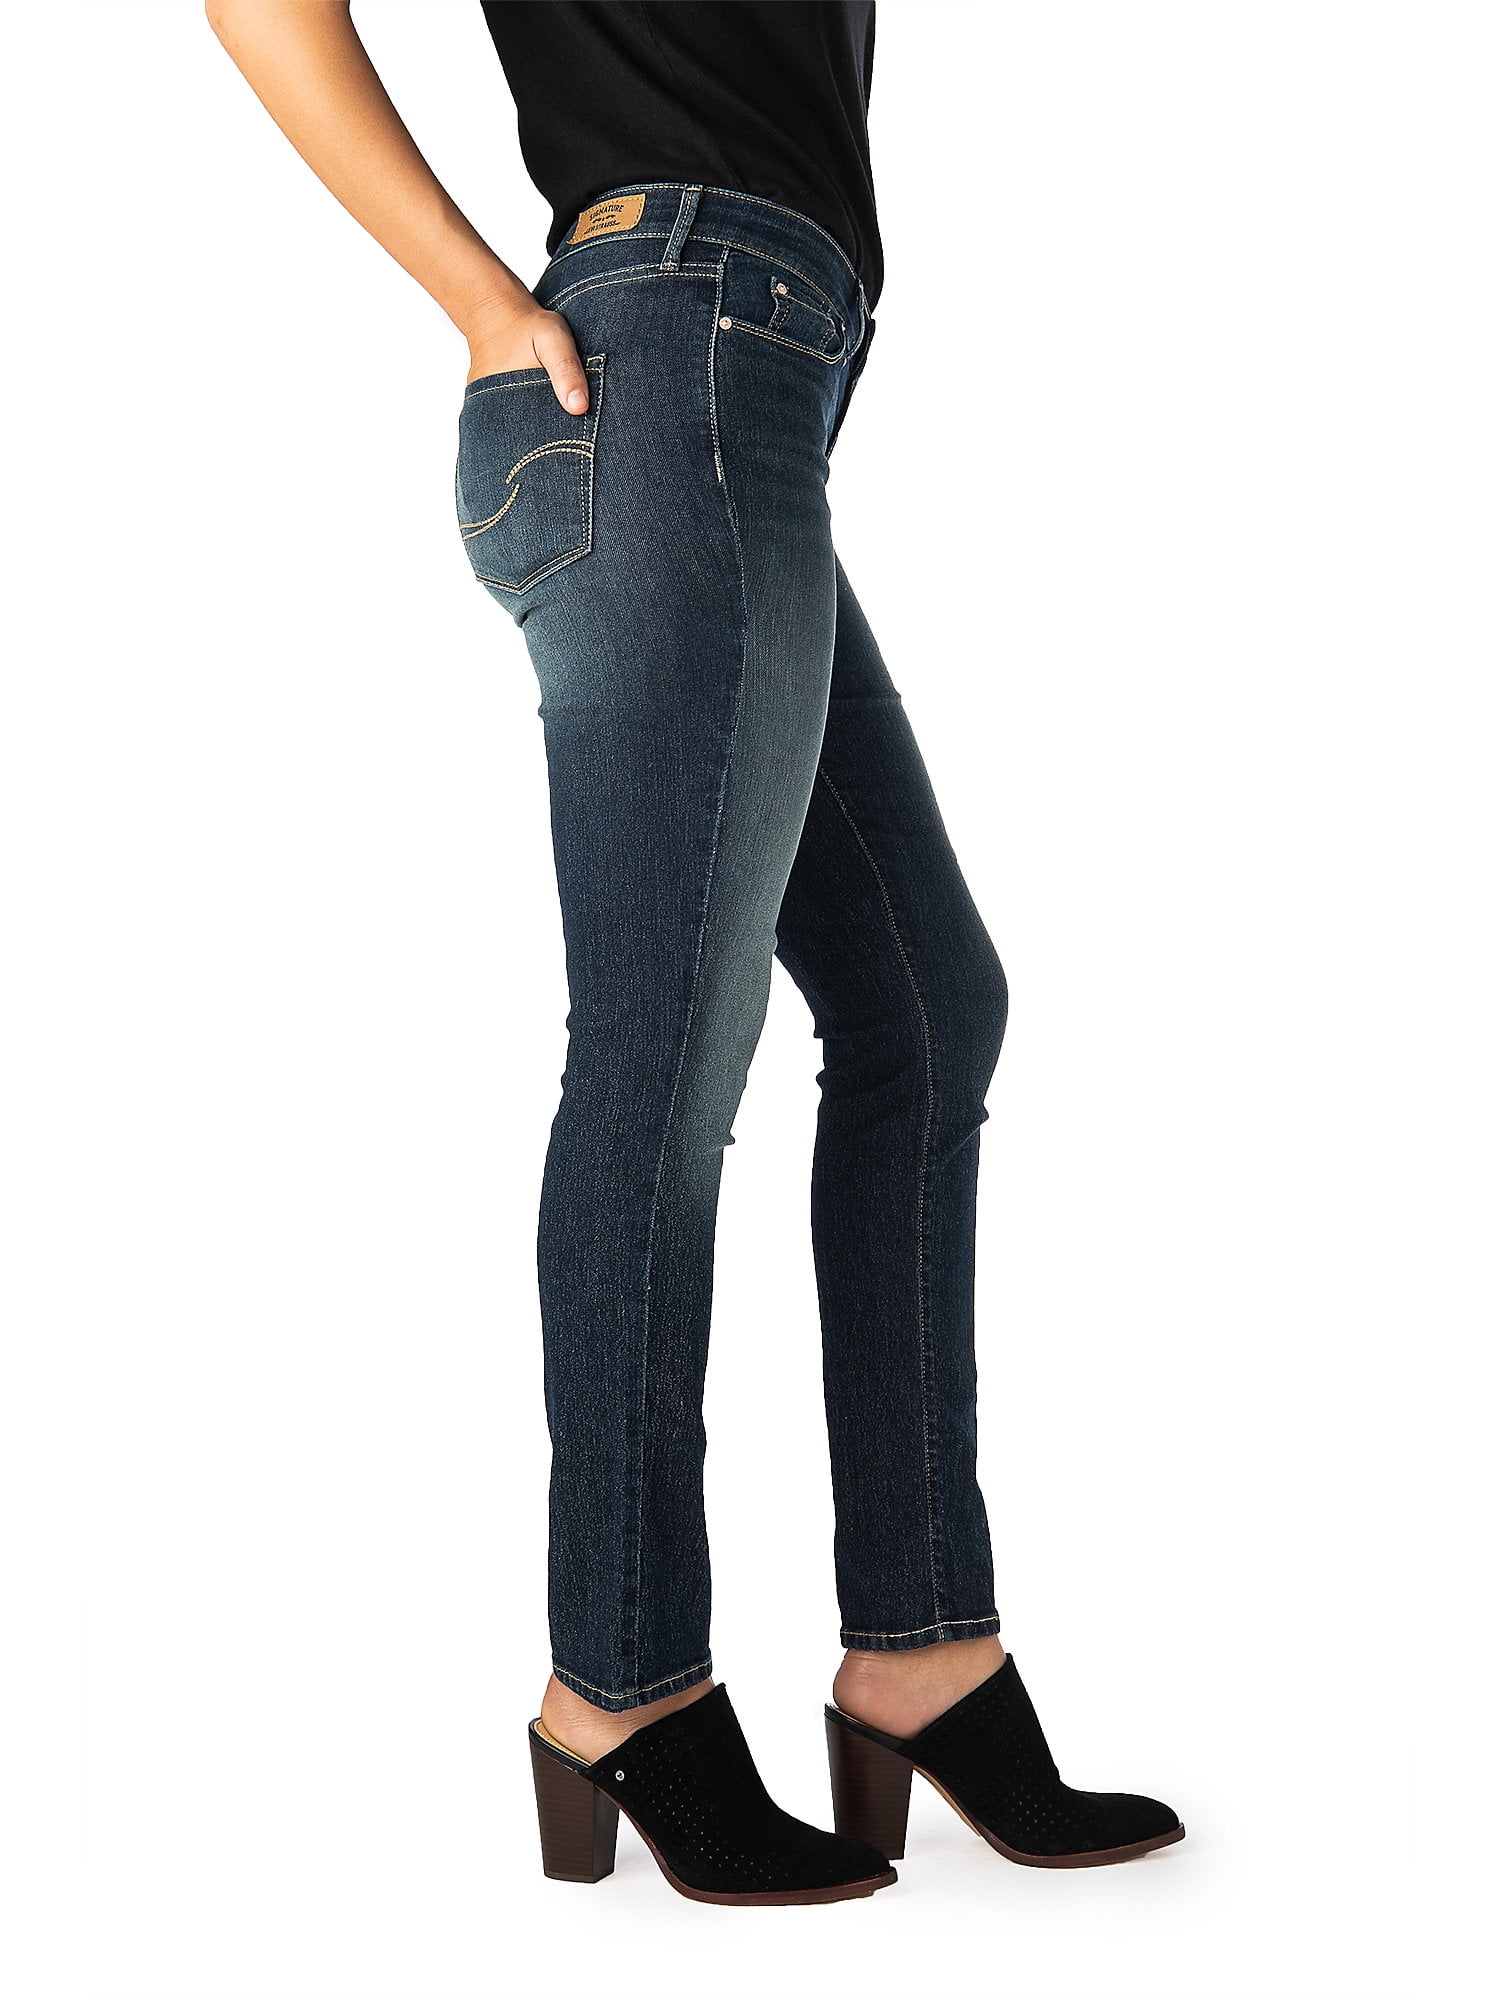 Signature by Levi Strauss & Co. Women's Mid-Rise Modern Slim Jeans -  